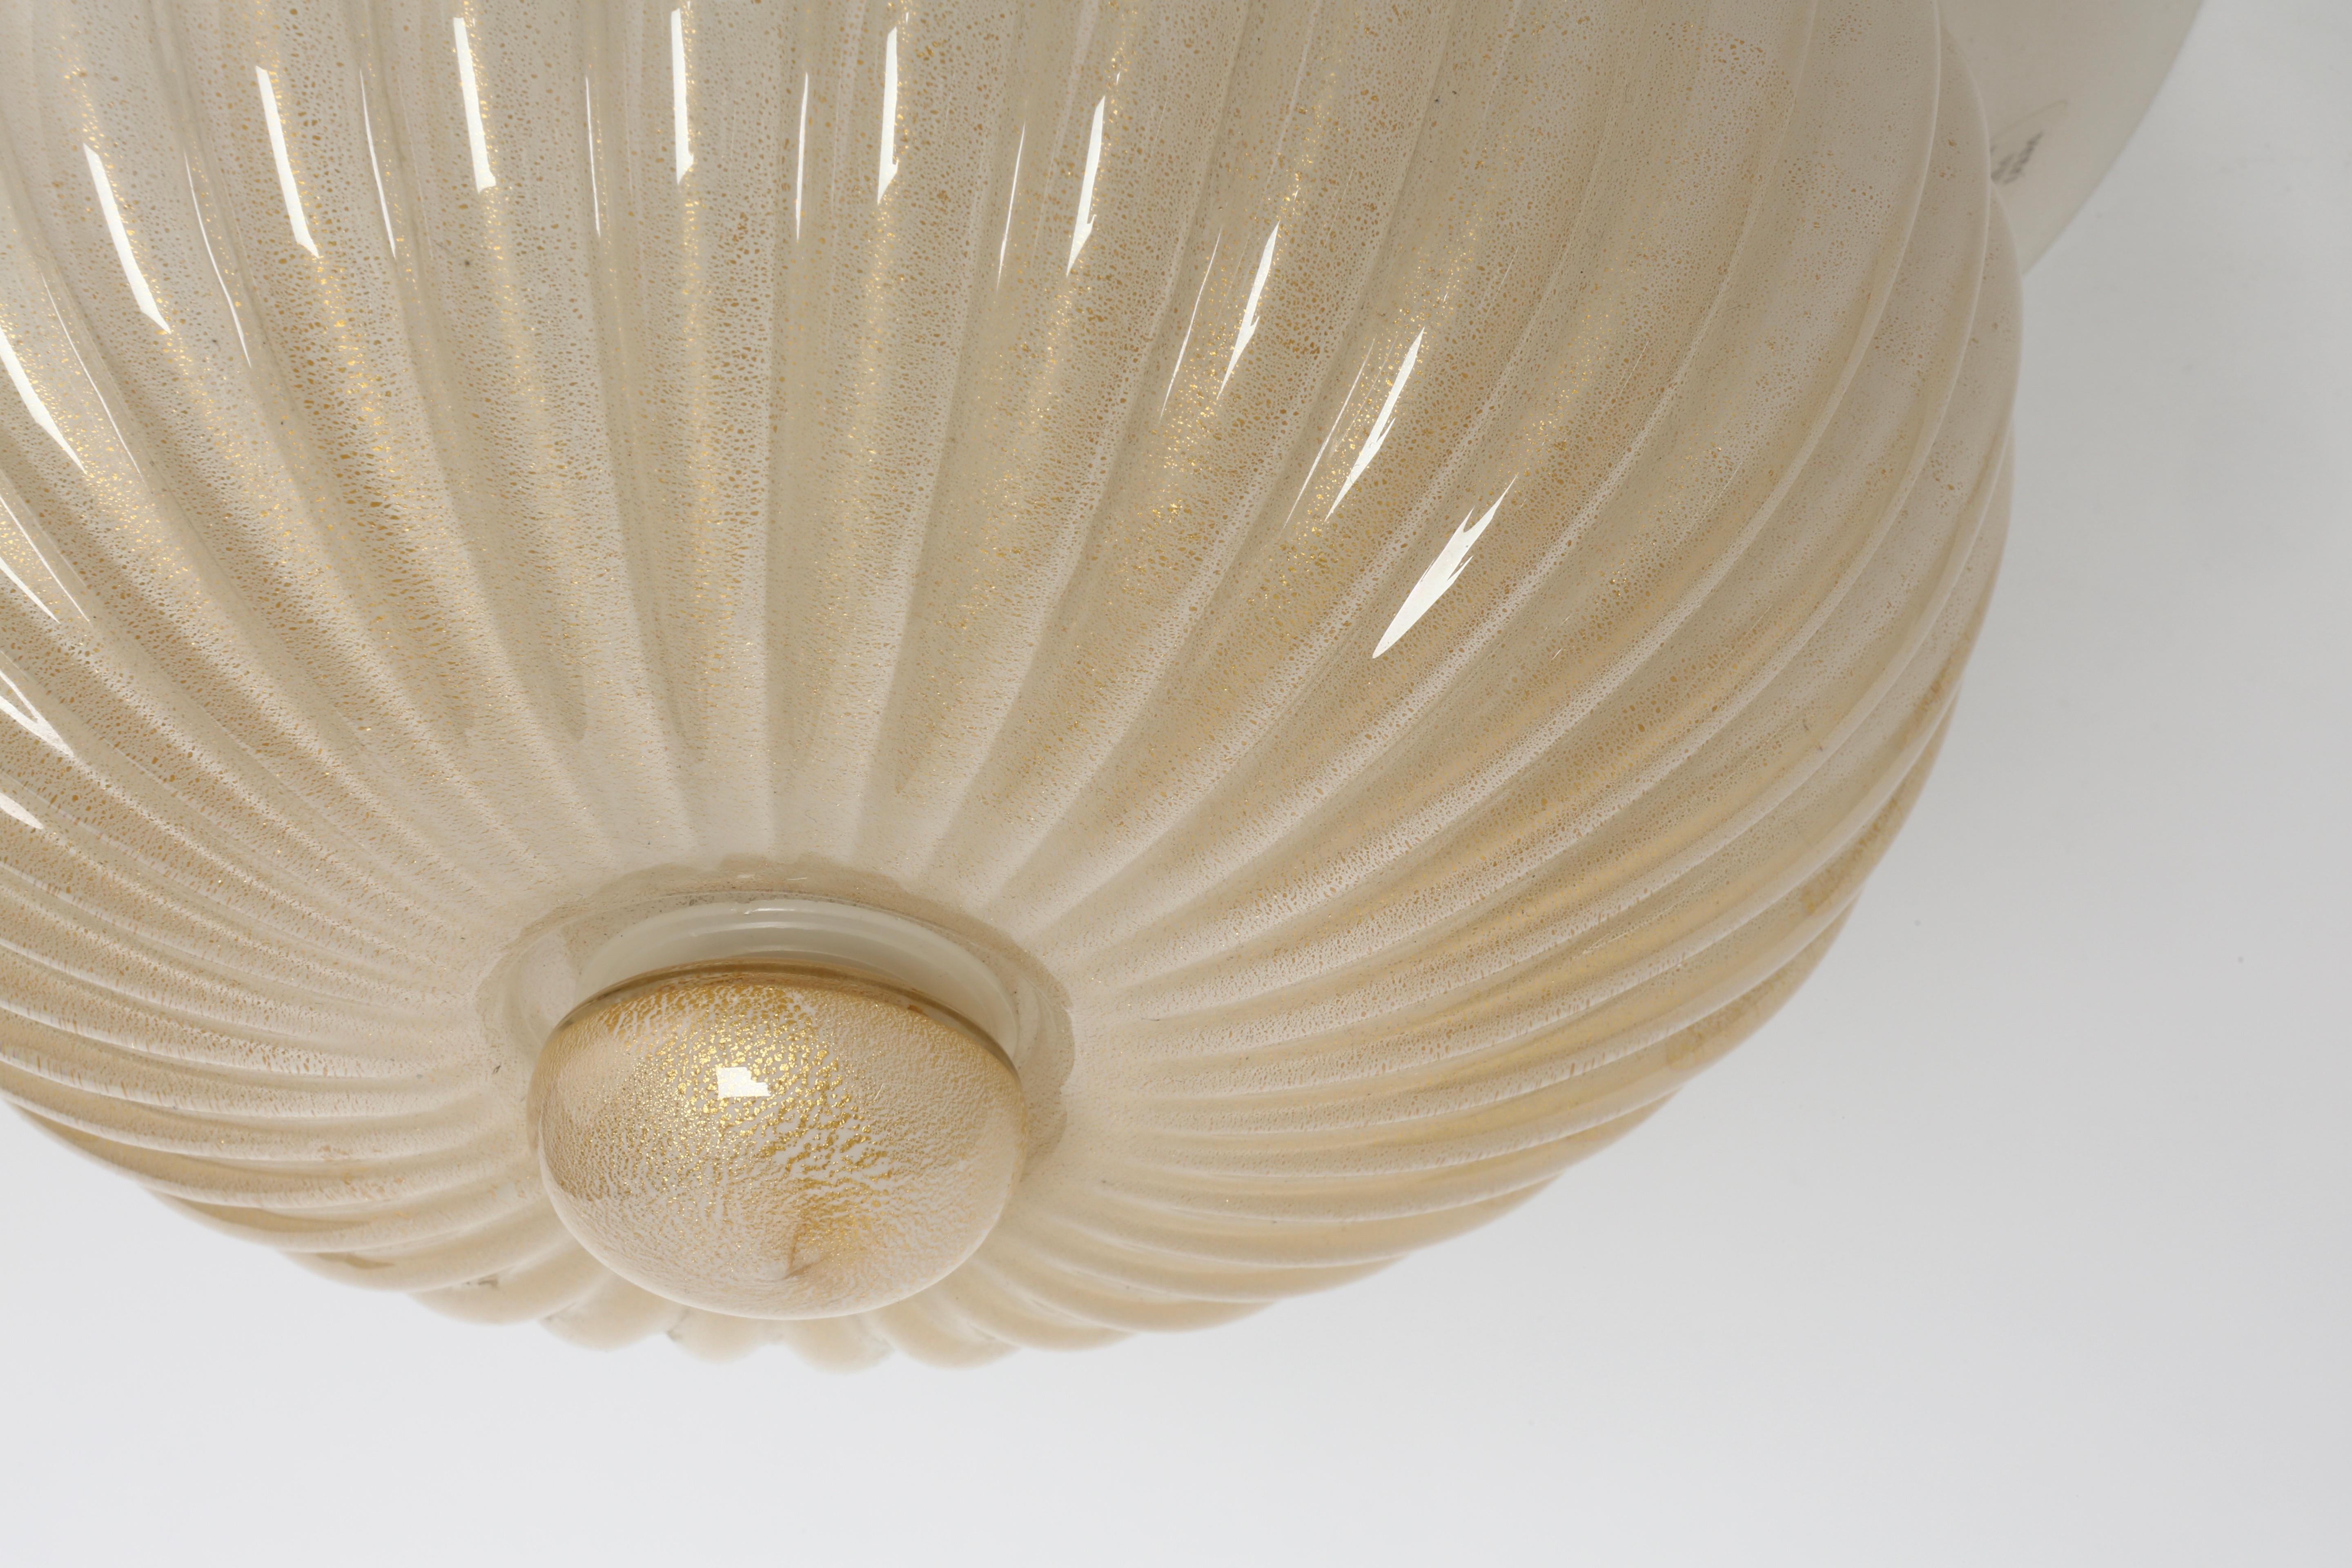 Late 20th Century Murano Flush Mount Ceiling Light by Barovier & Toso